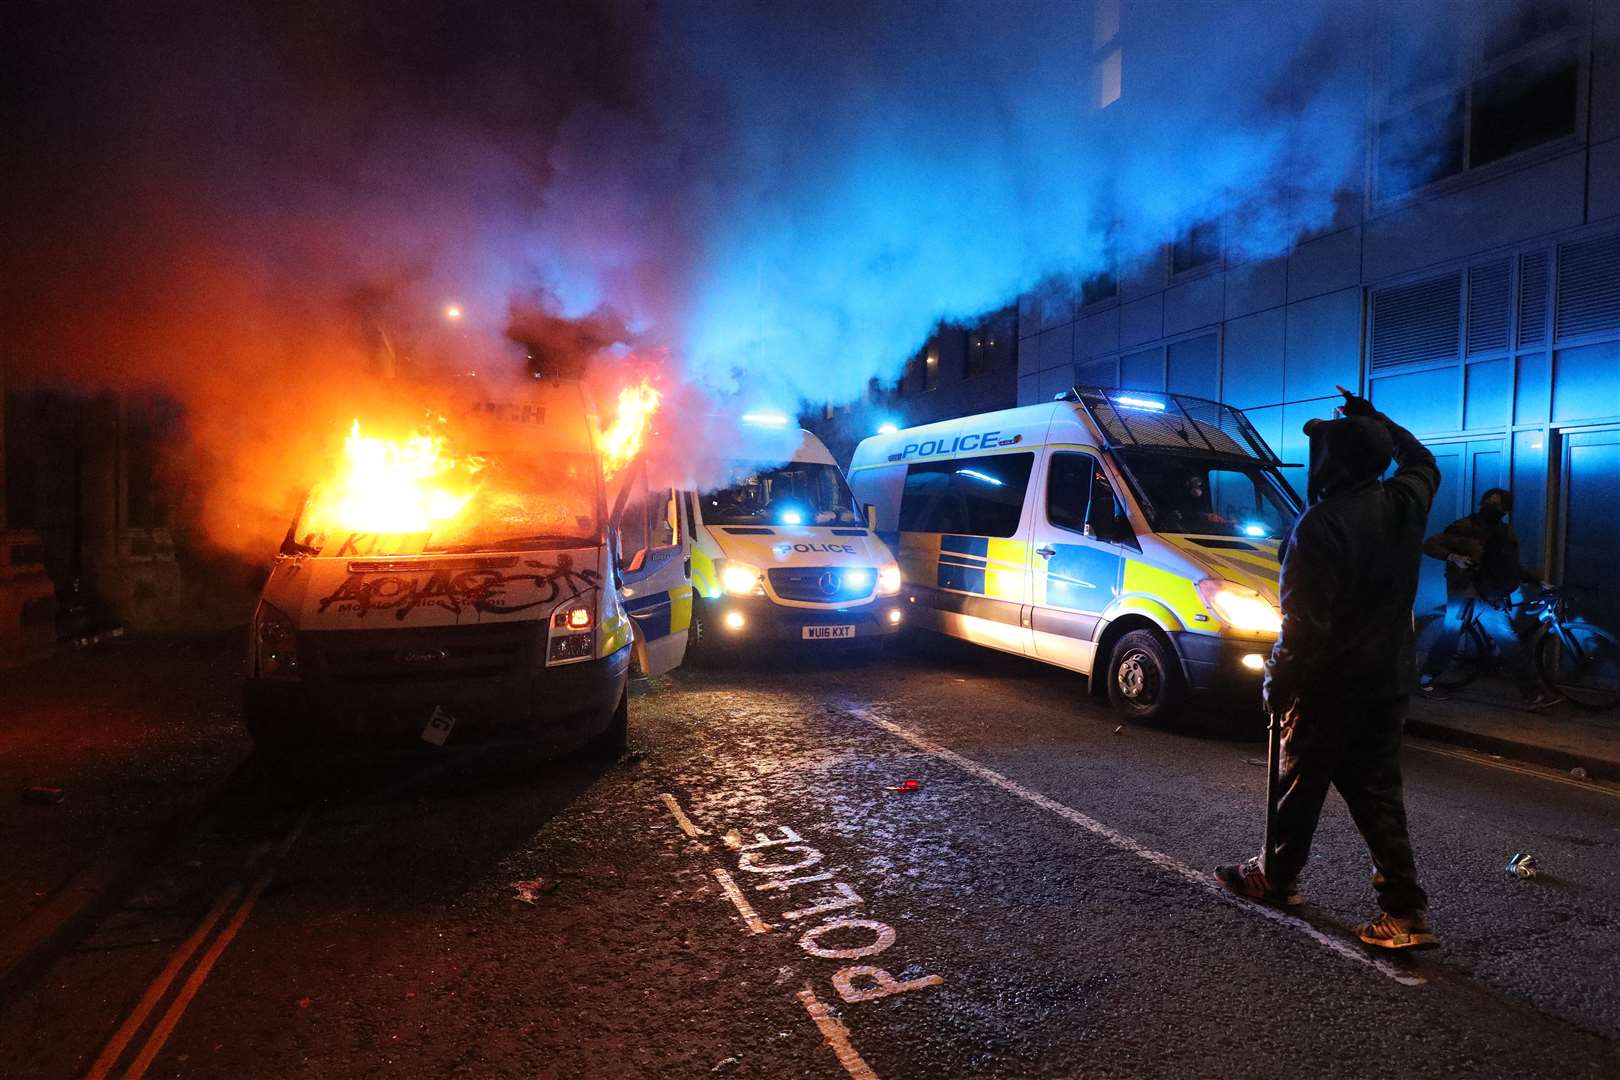 A vandalised police van on fire outside Bridewell police station on March 21 (Andrew Matthews/PA)